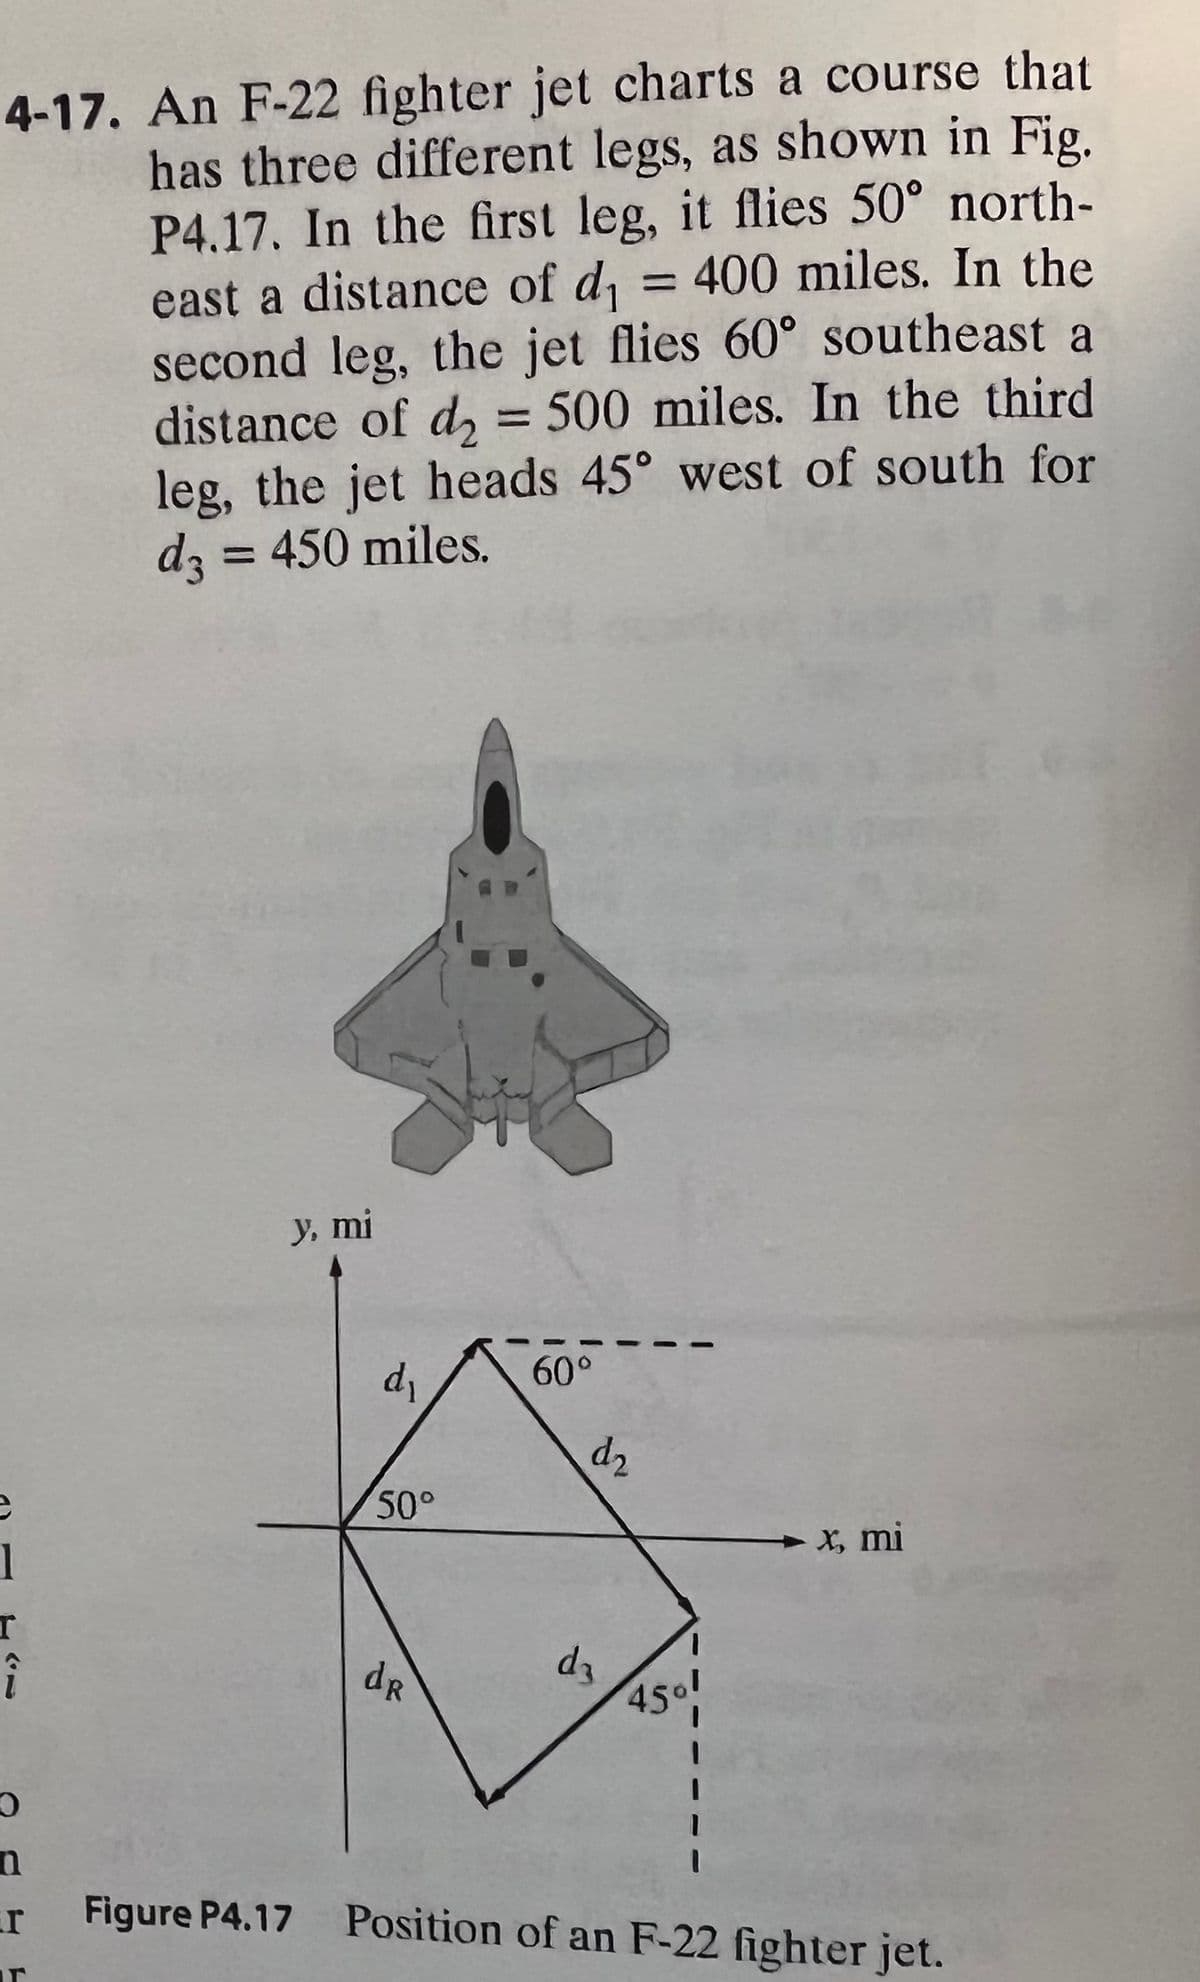 4-17. An F-22 fighter jet charts a course that
has three different legs, as shown in Fig.
P4.17. In the first leg, it flies 50° north-
east a distance of d = 400 miles. In the
second leg, the jet flies 60° southeast a
distance of d = 500 miles. In the third
leg, the jet heads 45° west of south for
dz = 450 miles.
%3D
1
%3D
У, mi
d1
60°
d2
50°
1
x, mi
dR
dz
450
ar
Figure P4.17 Position of an F-22 fighter jet.
